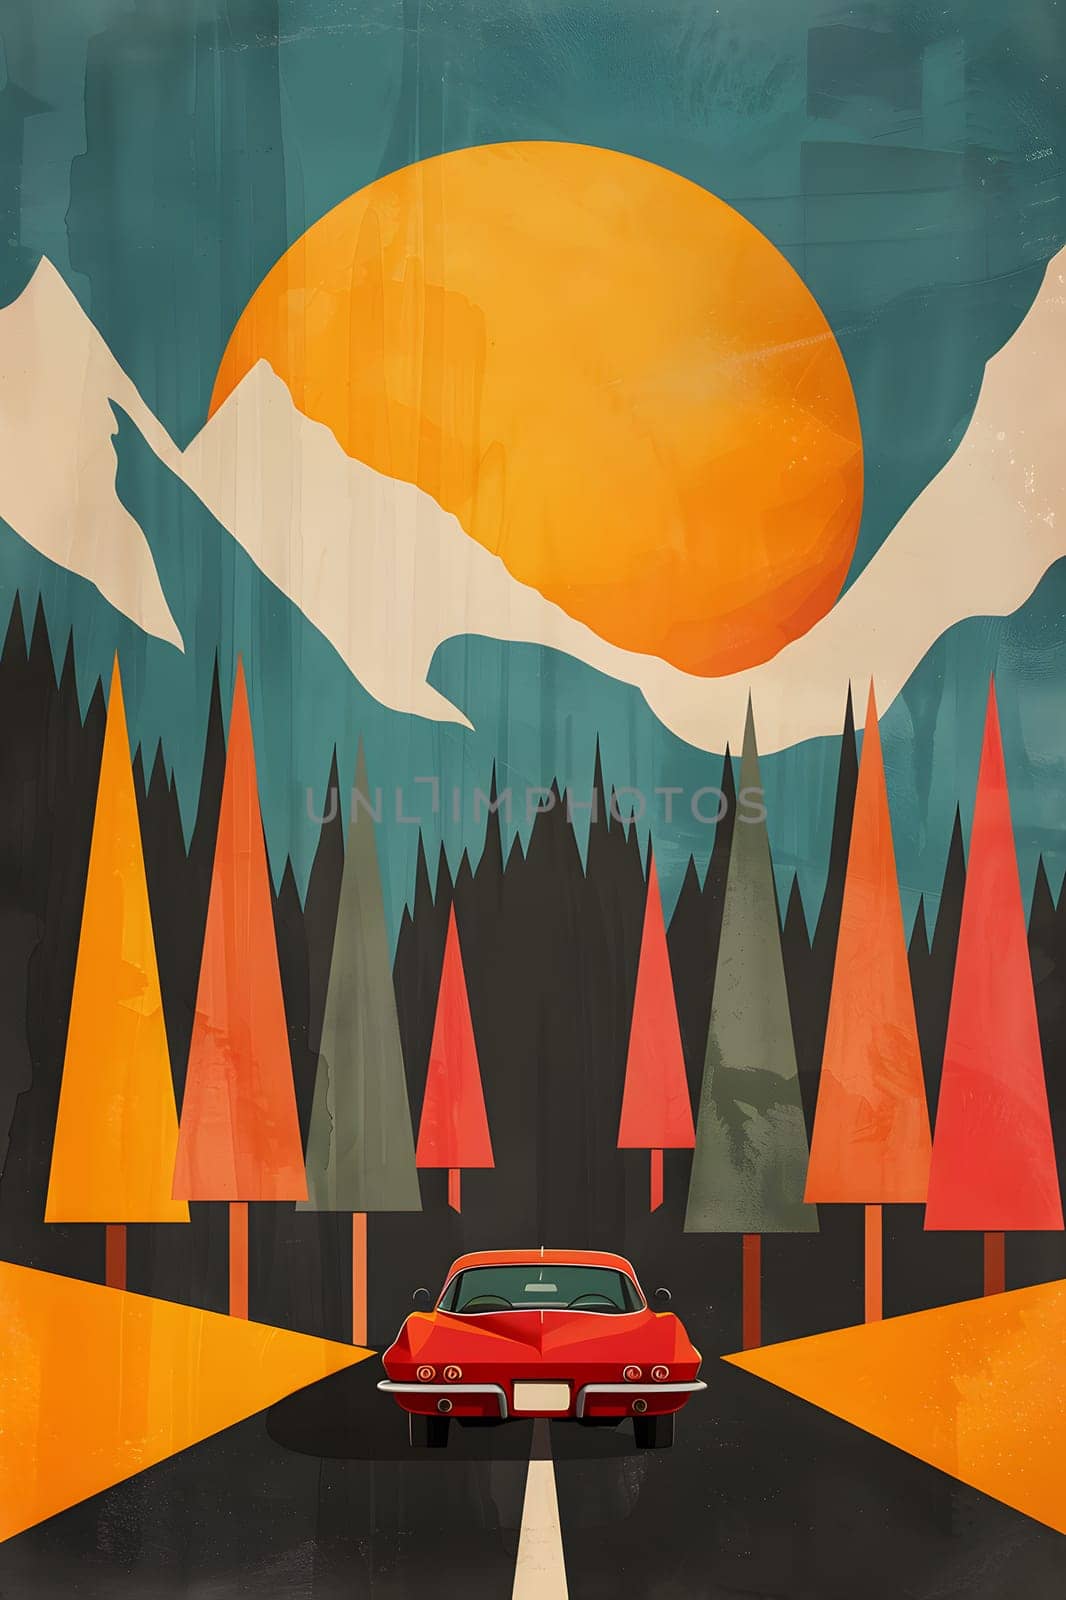 A red car painted orange drives through a scenic world of trees and mountains by Nadtochiy